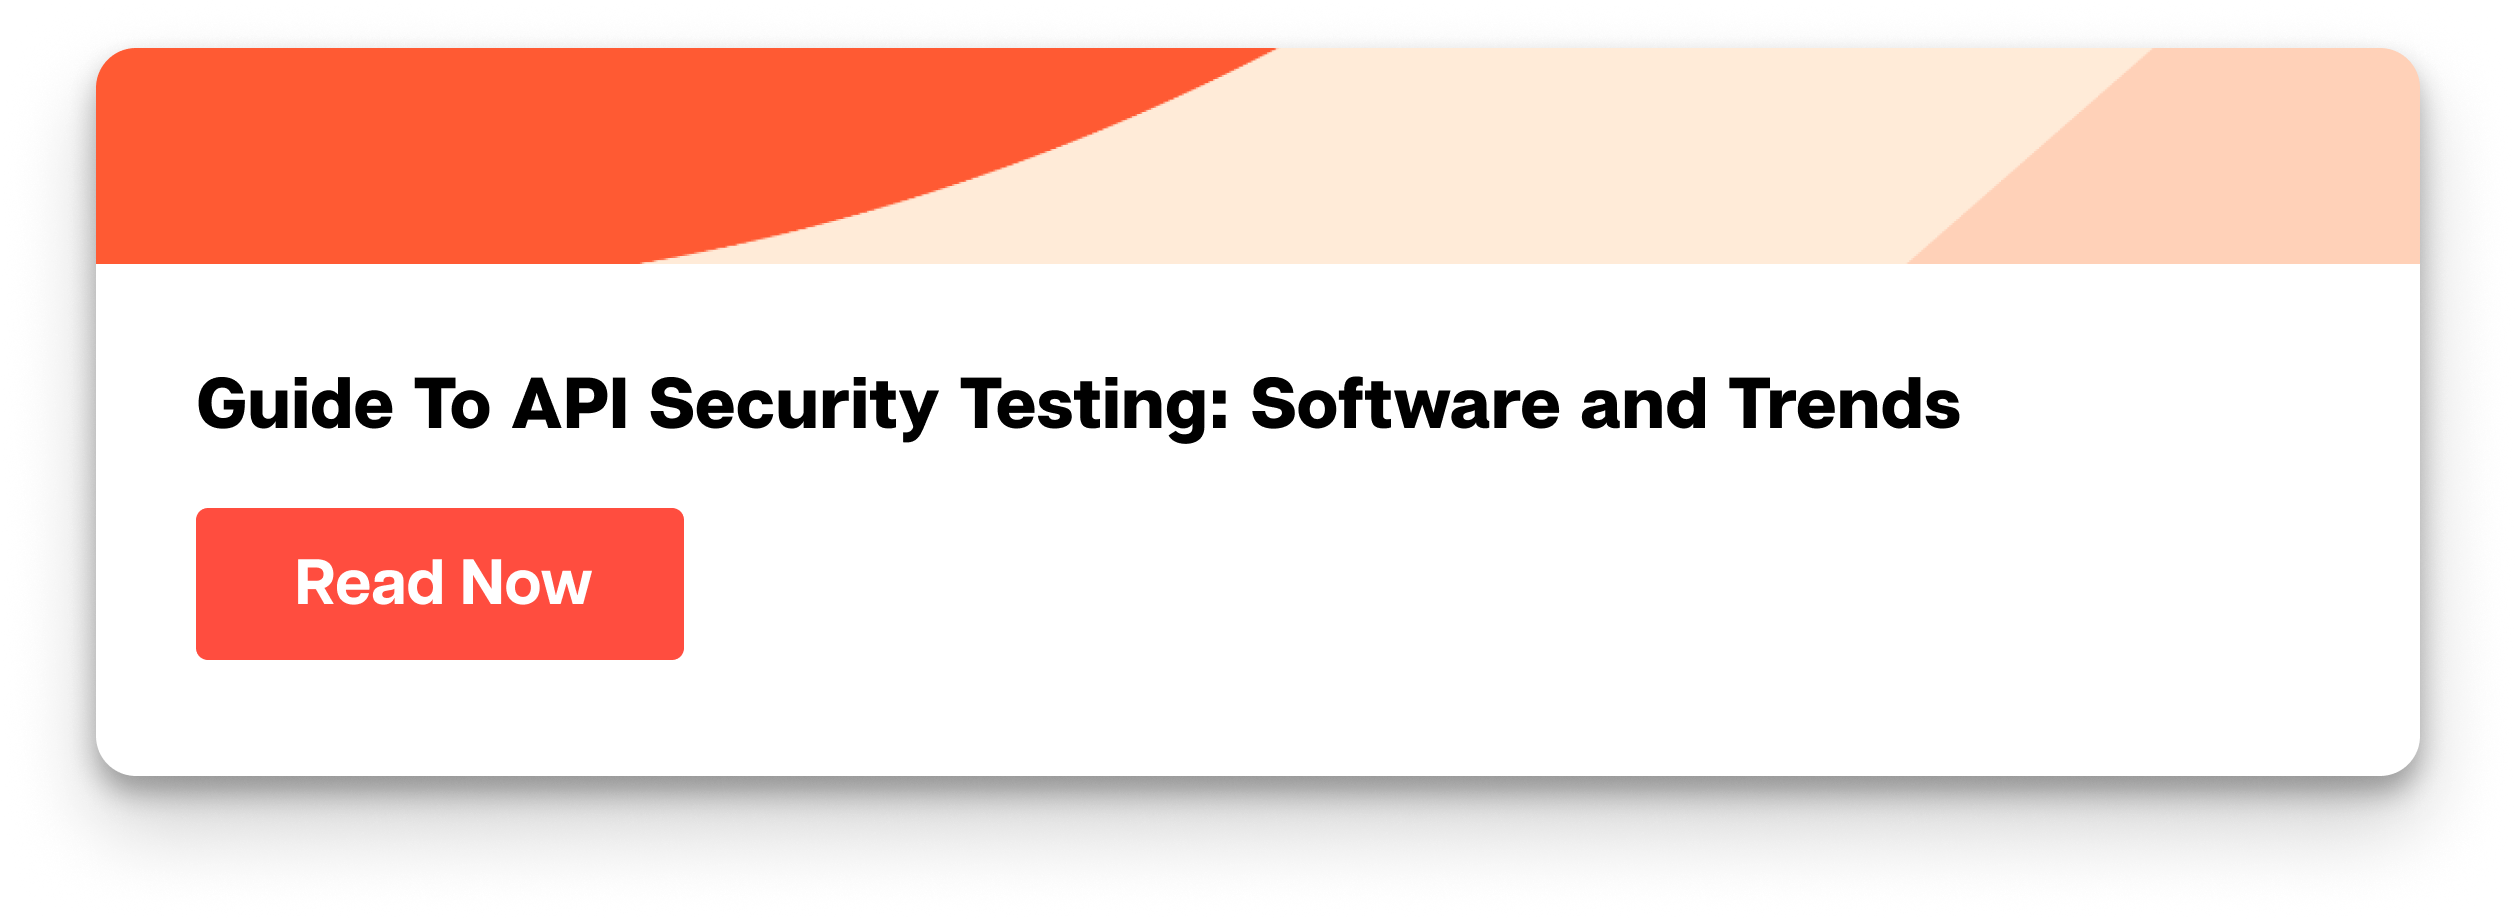 Guide To API Security Testing Software and Trends